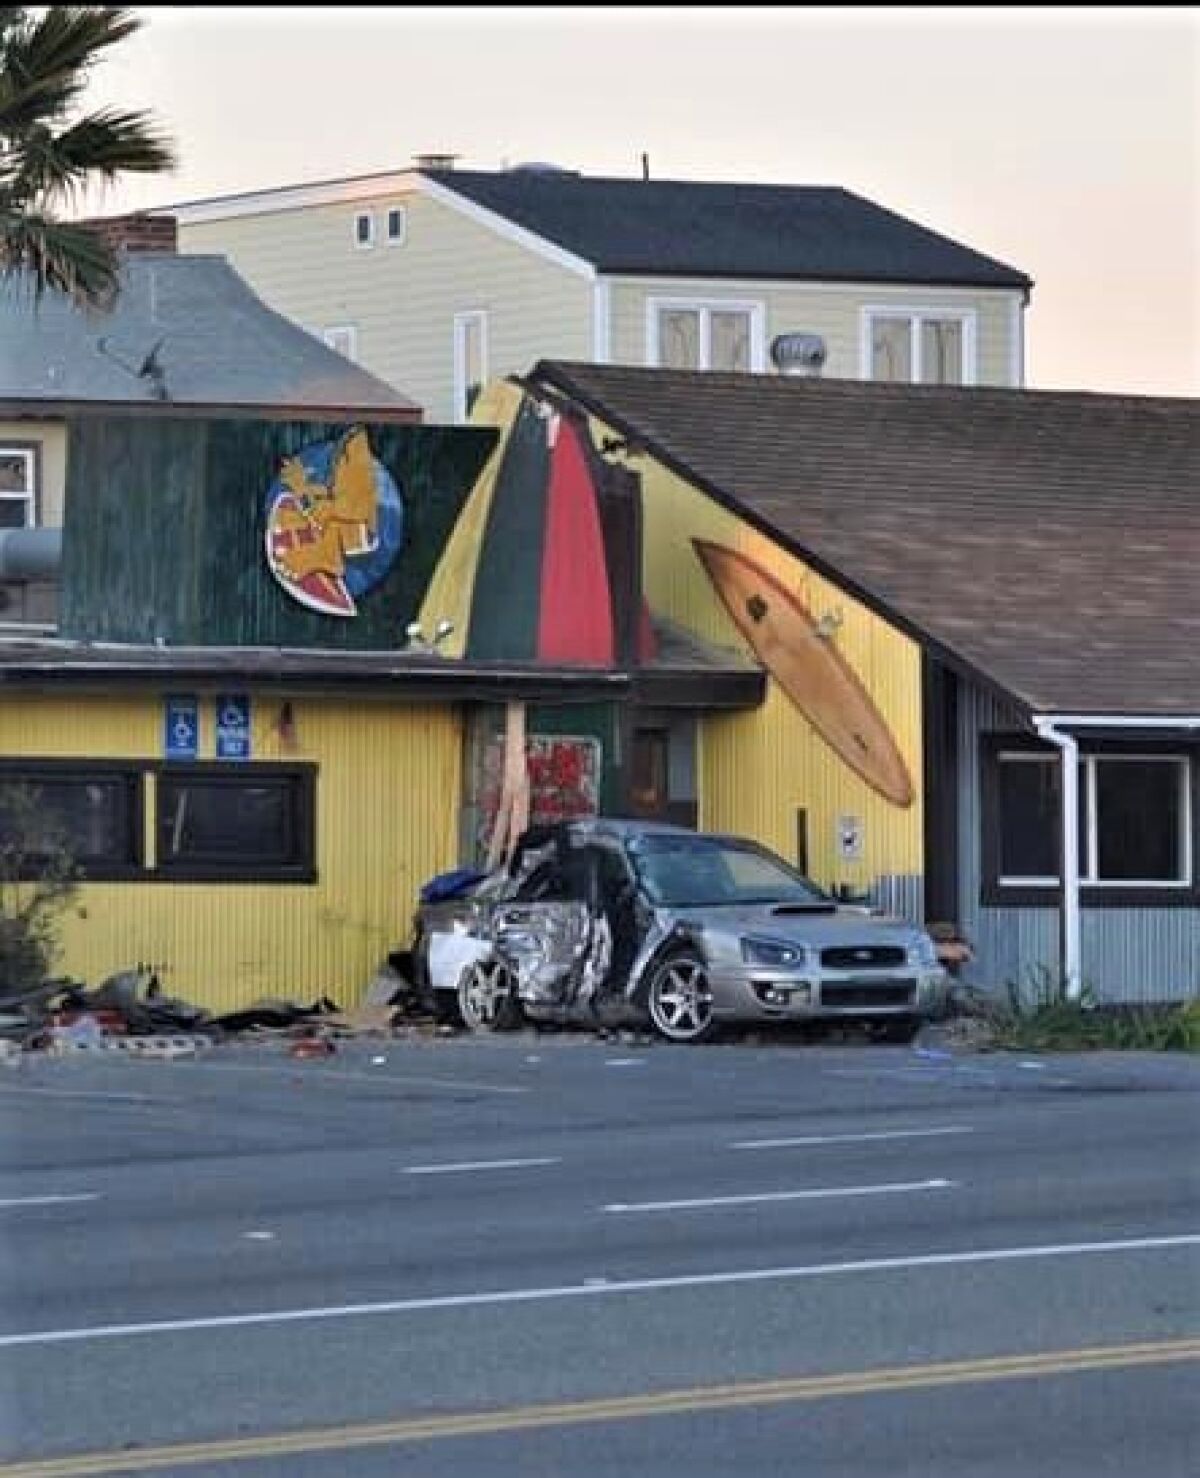 A vehicle crashed into a Taco Surf restaurant on PCH in Surfside in February, less than a year after an earlier crash.